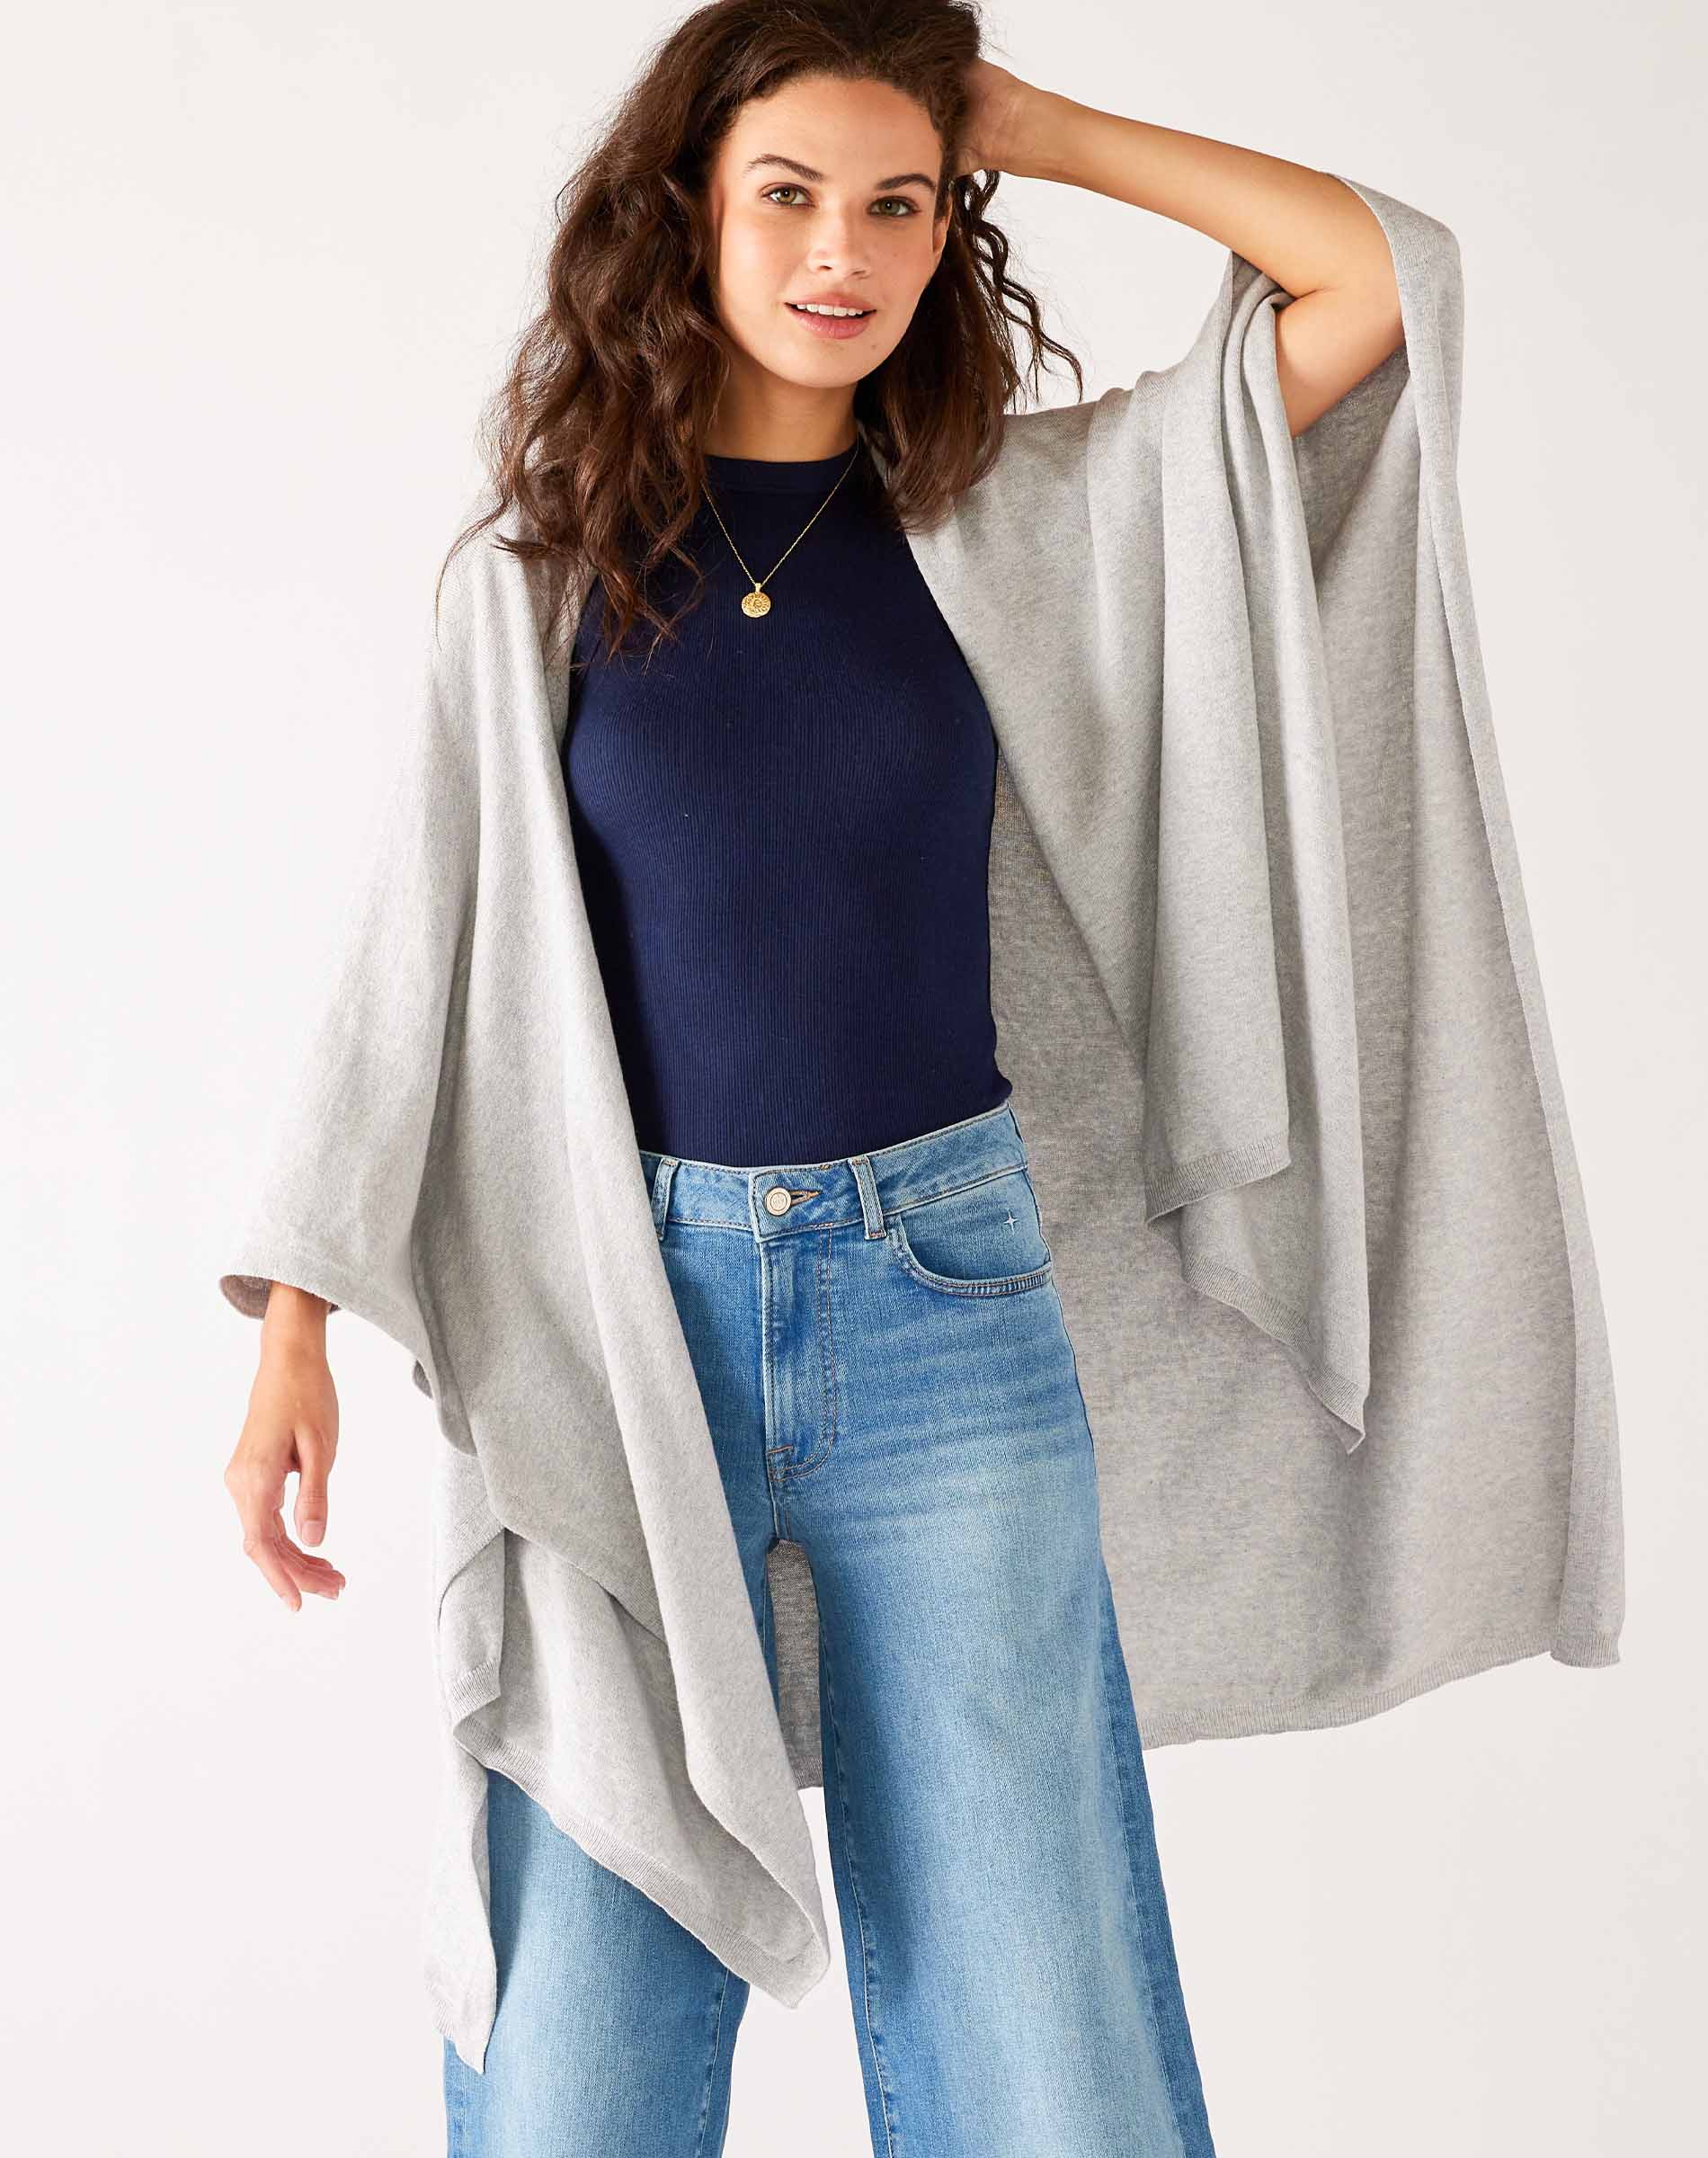 Women's Light Grey Heathered Cashmere Lightweight Travel Wrap Open Front View with Hand on Head